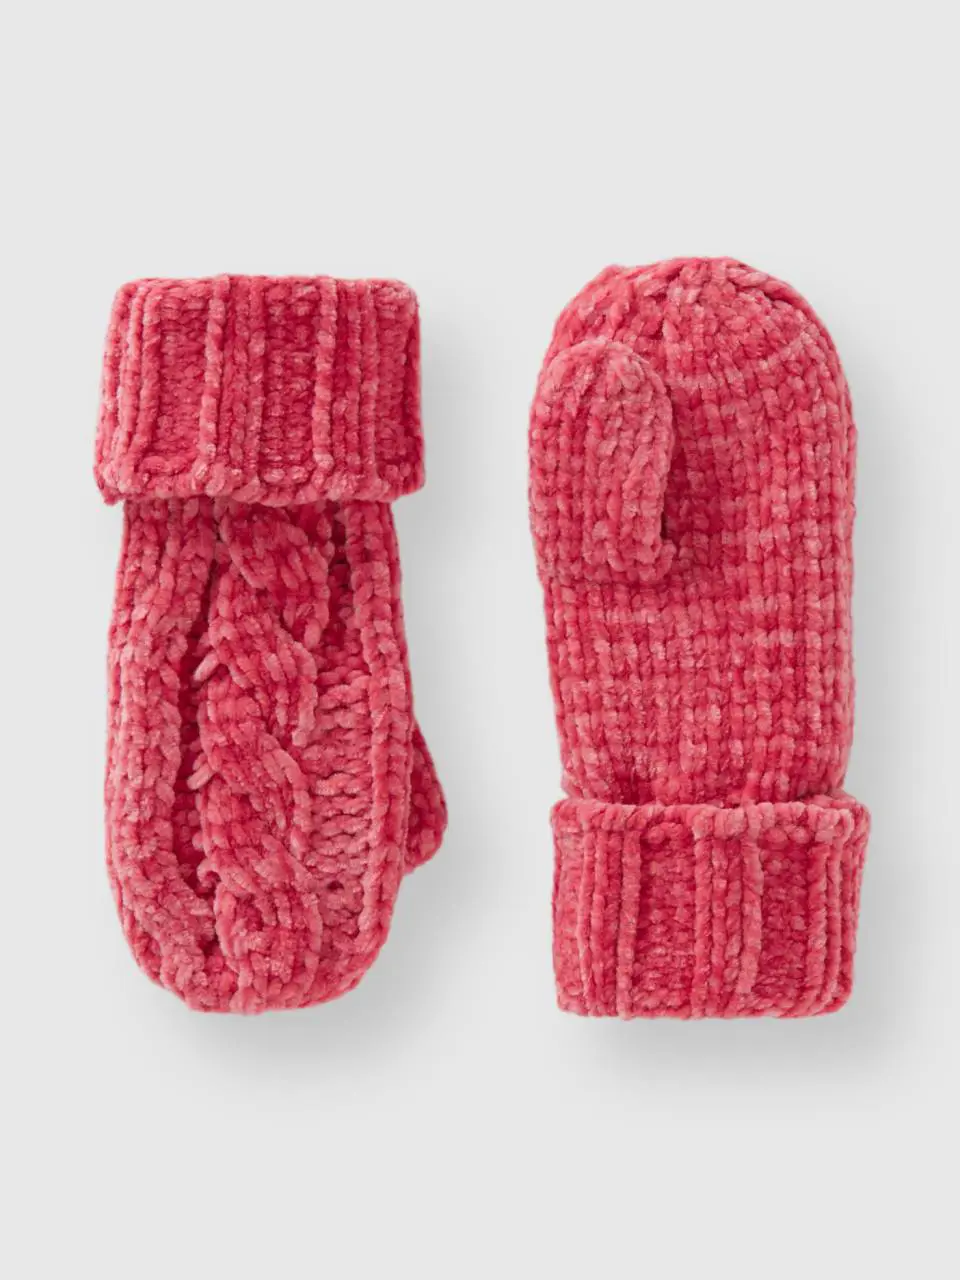 Benetton chenille gloves with cable knit. 1